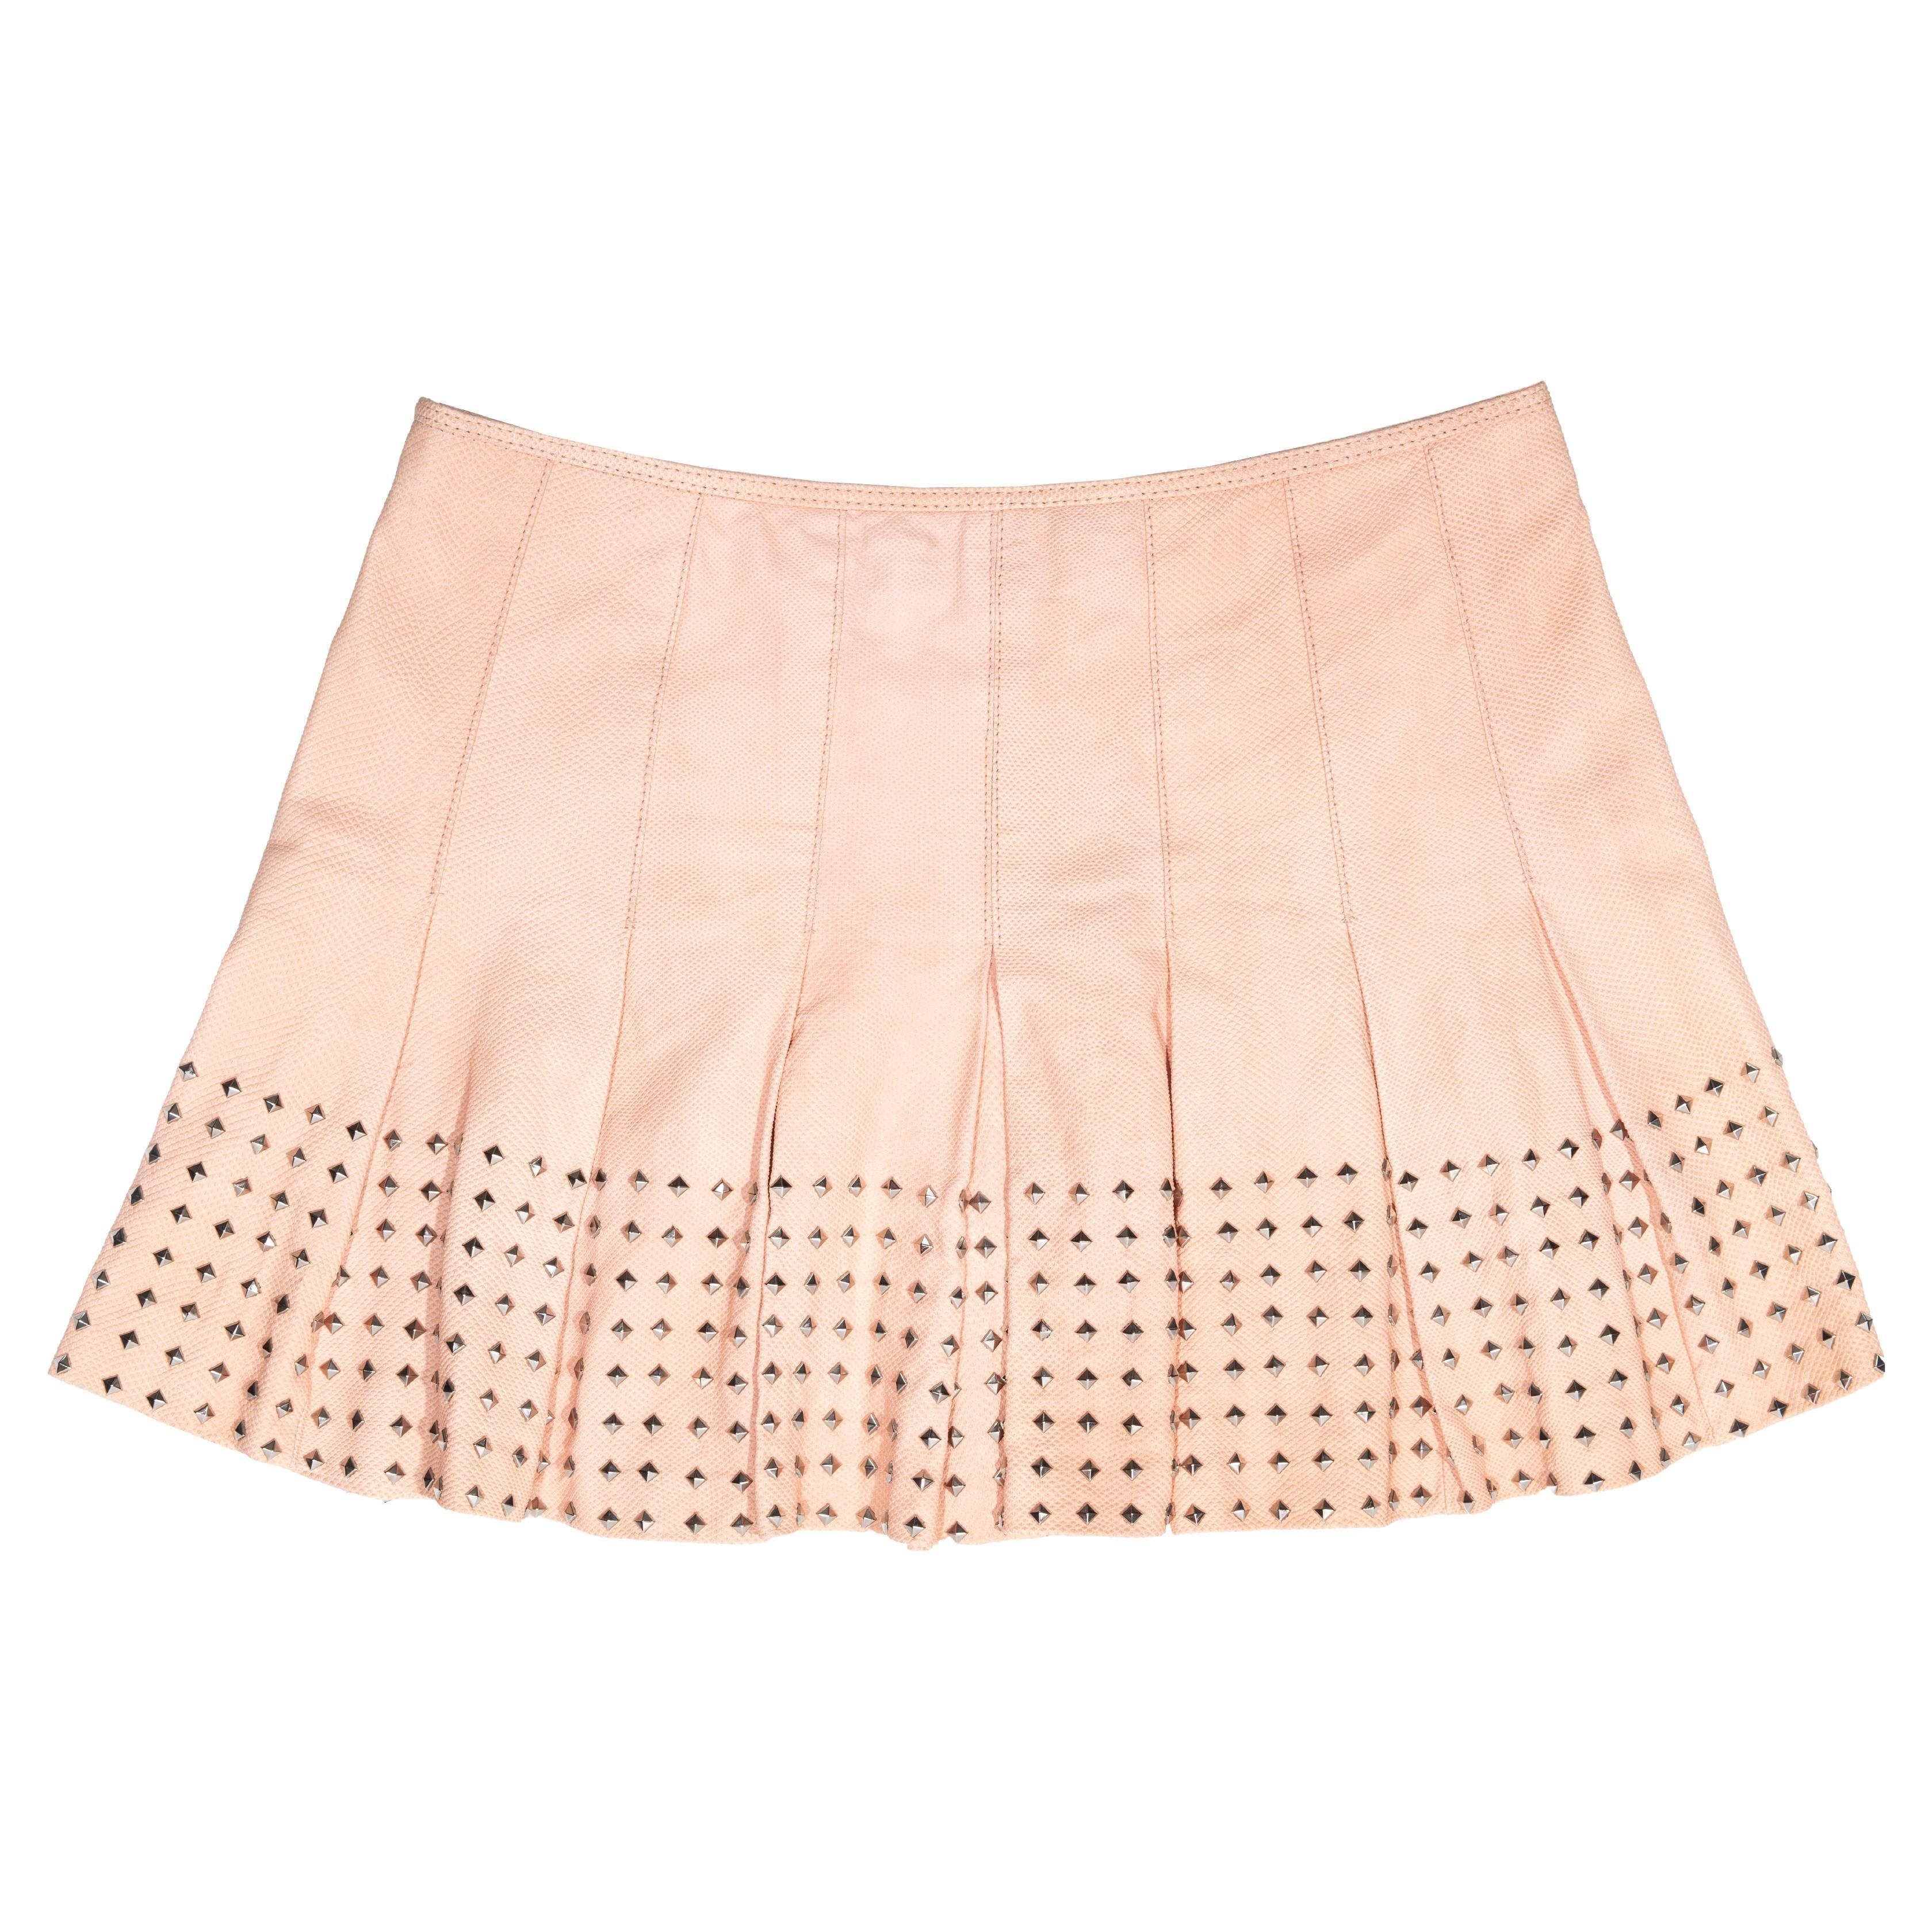 Gianni Versace pink pleated leather mini skirt, ss 2003 For Sale